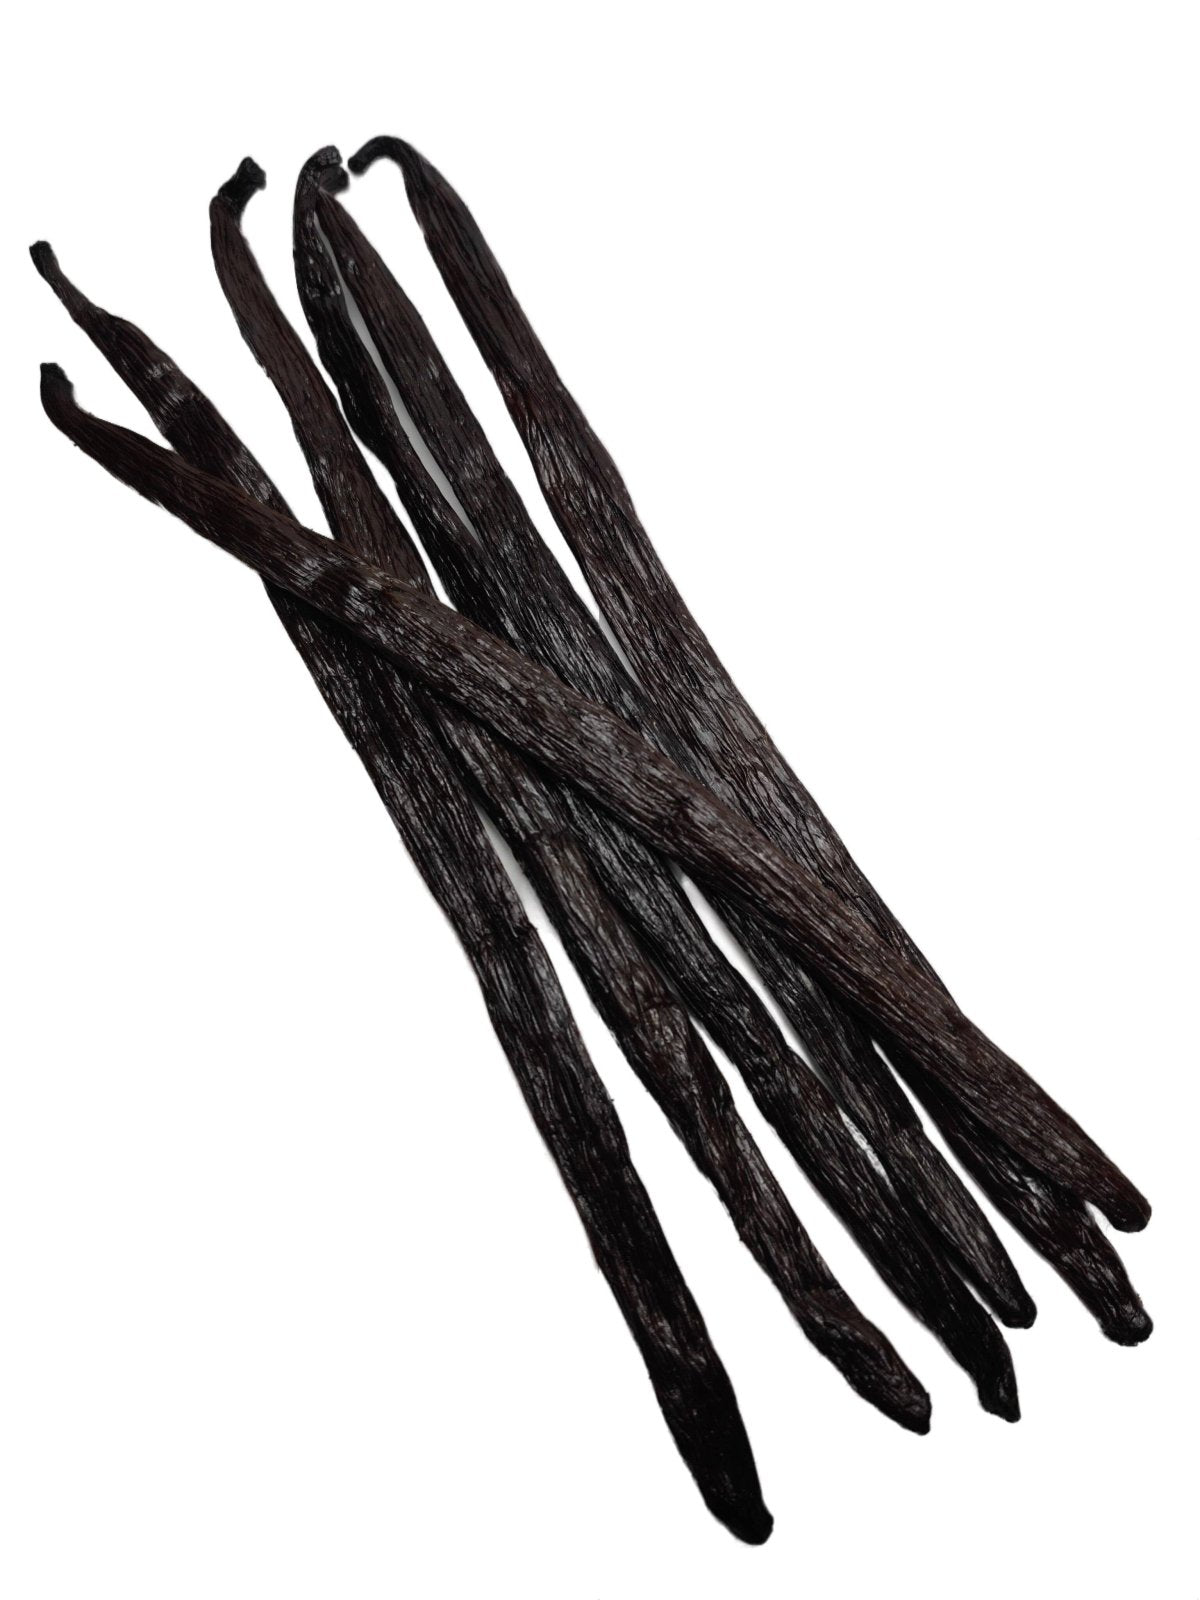 Co-op Pricing Ugandan Grade-A Gourmet Vanilla Beans (Per Ounce)<br><br>Minimum Order quantity for this Co-op price is 2 ounces.